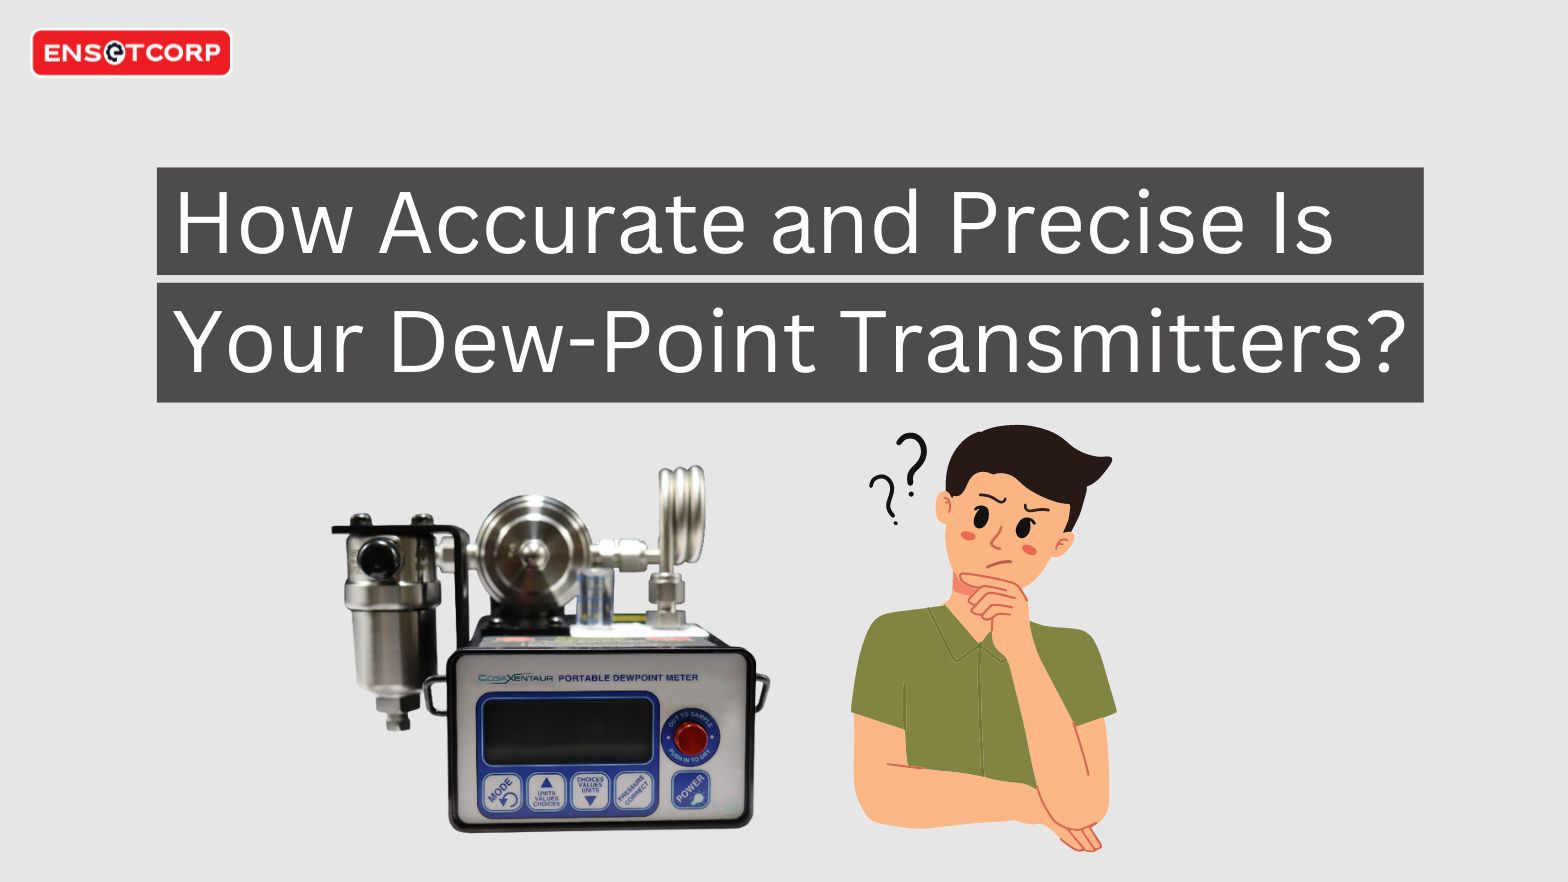 How Accurate and Precise Is Your Dew-Point Transmitters?